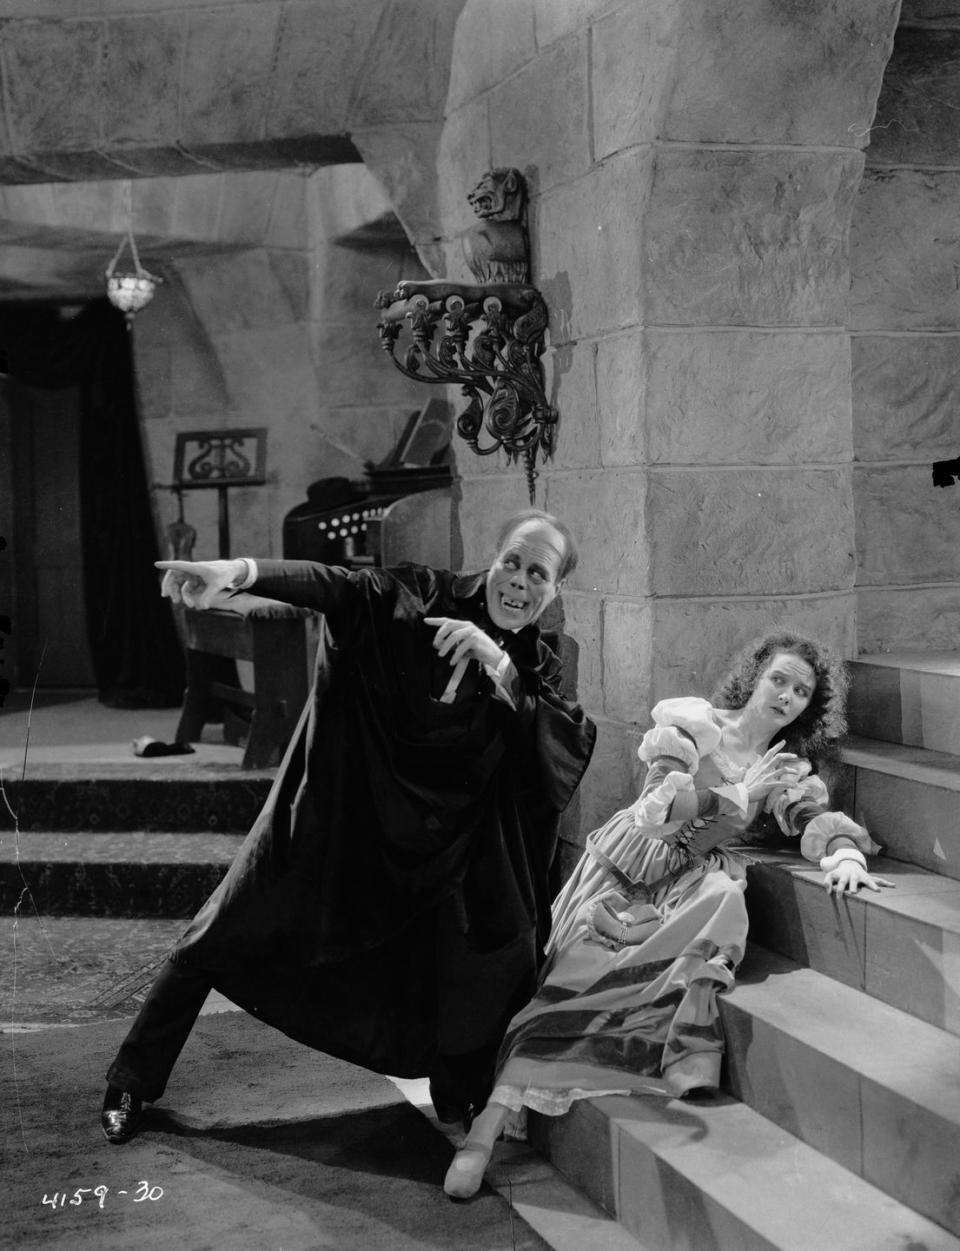 <p>An iconic version of <em>The Phantom Of The Opera</em> hit the silver screen, starring Mary Philbon as Christine Daae. Mary was the No.1 name for girls all through the 1920s – and the actress only made it more popular. That year, Betty dethroned Helen to take the No. 3 spot, while Dorothy held steady. Boys' picks were still Robert, John, and William.</p>